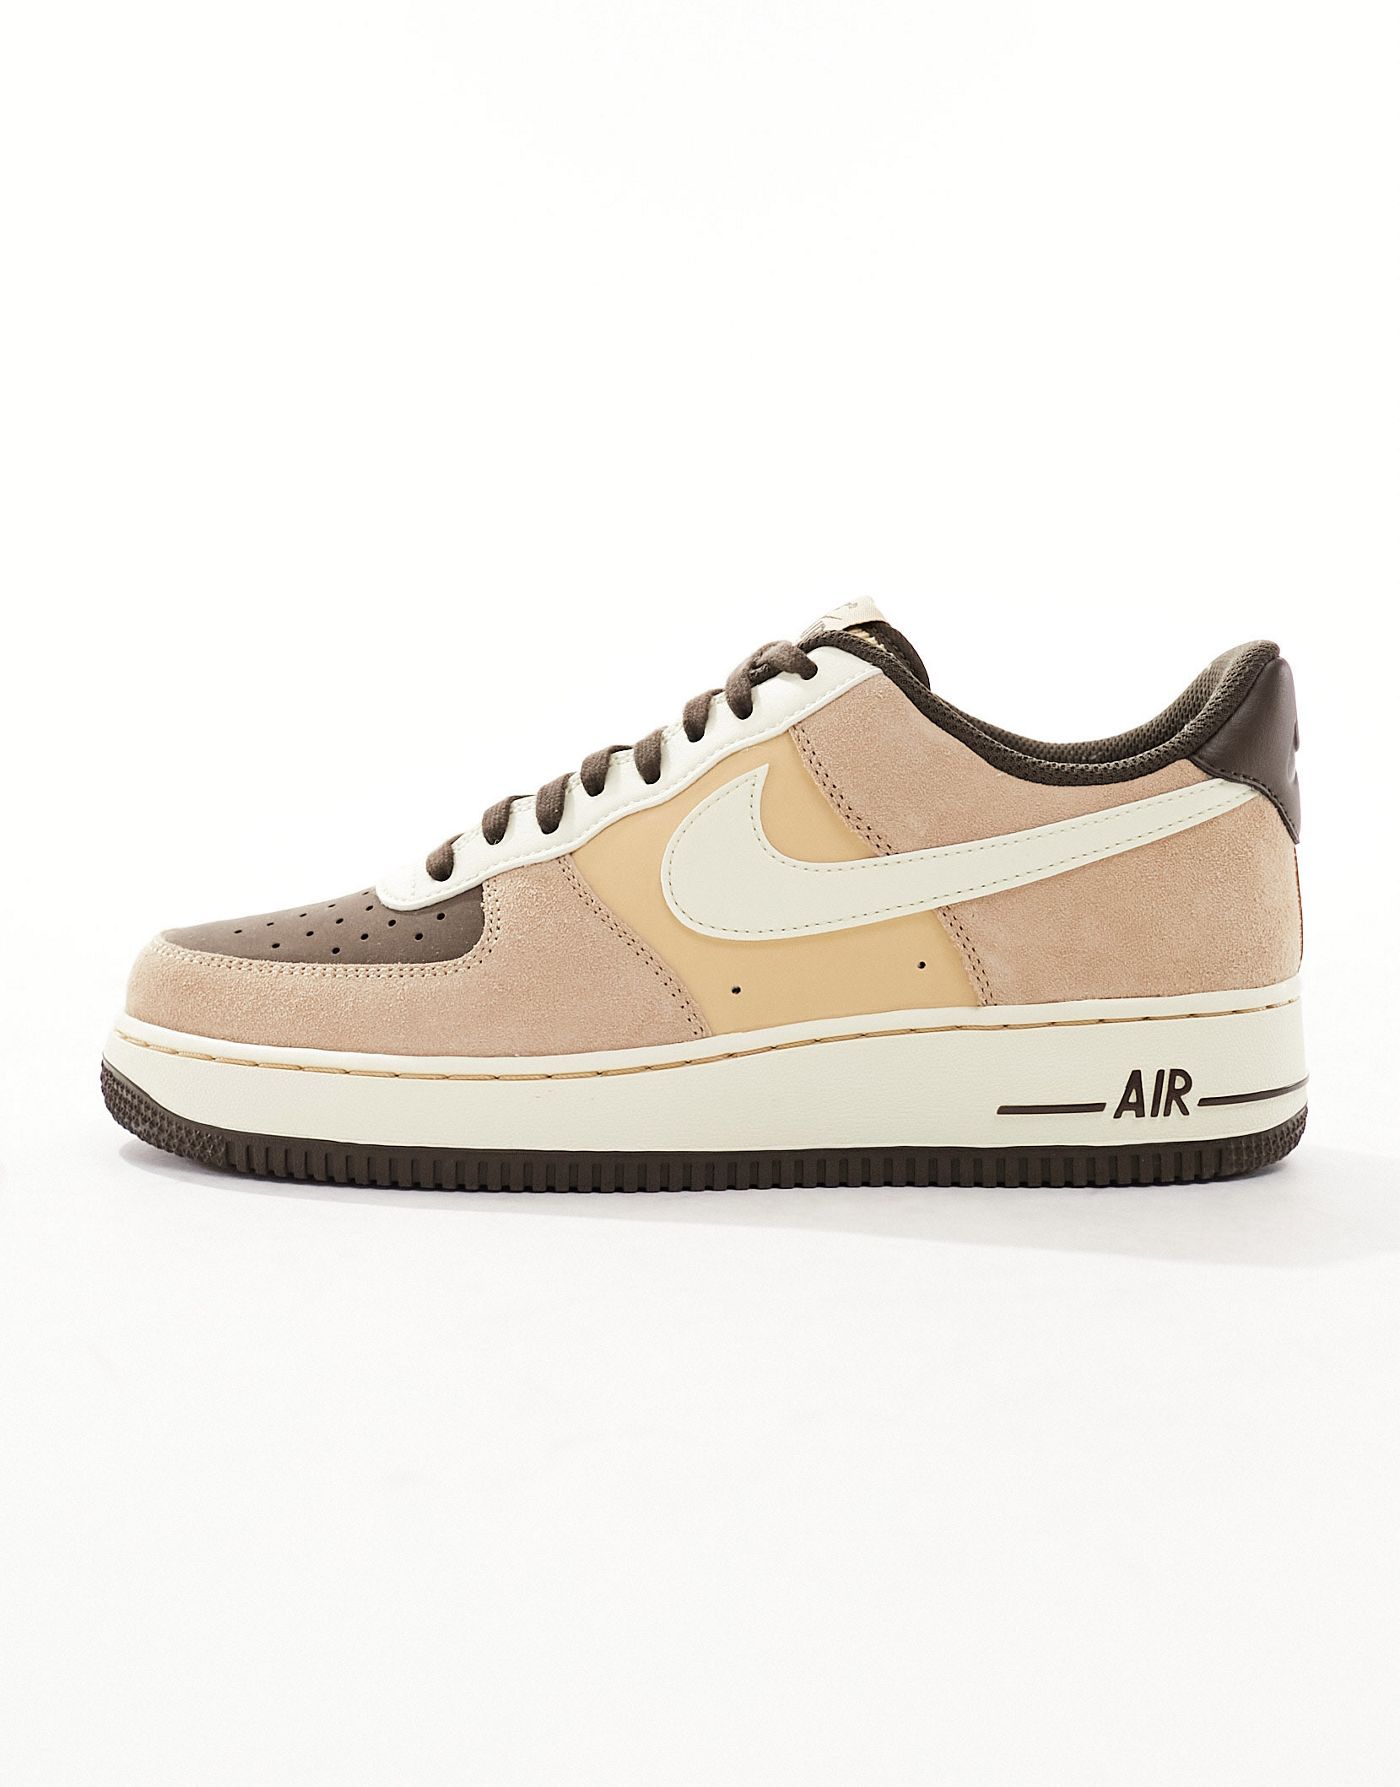 Nike Air Force 1 '07 trainers in brown multi